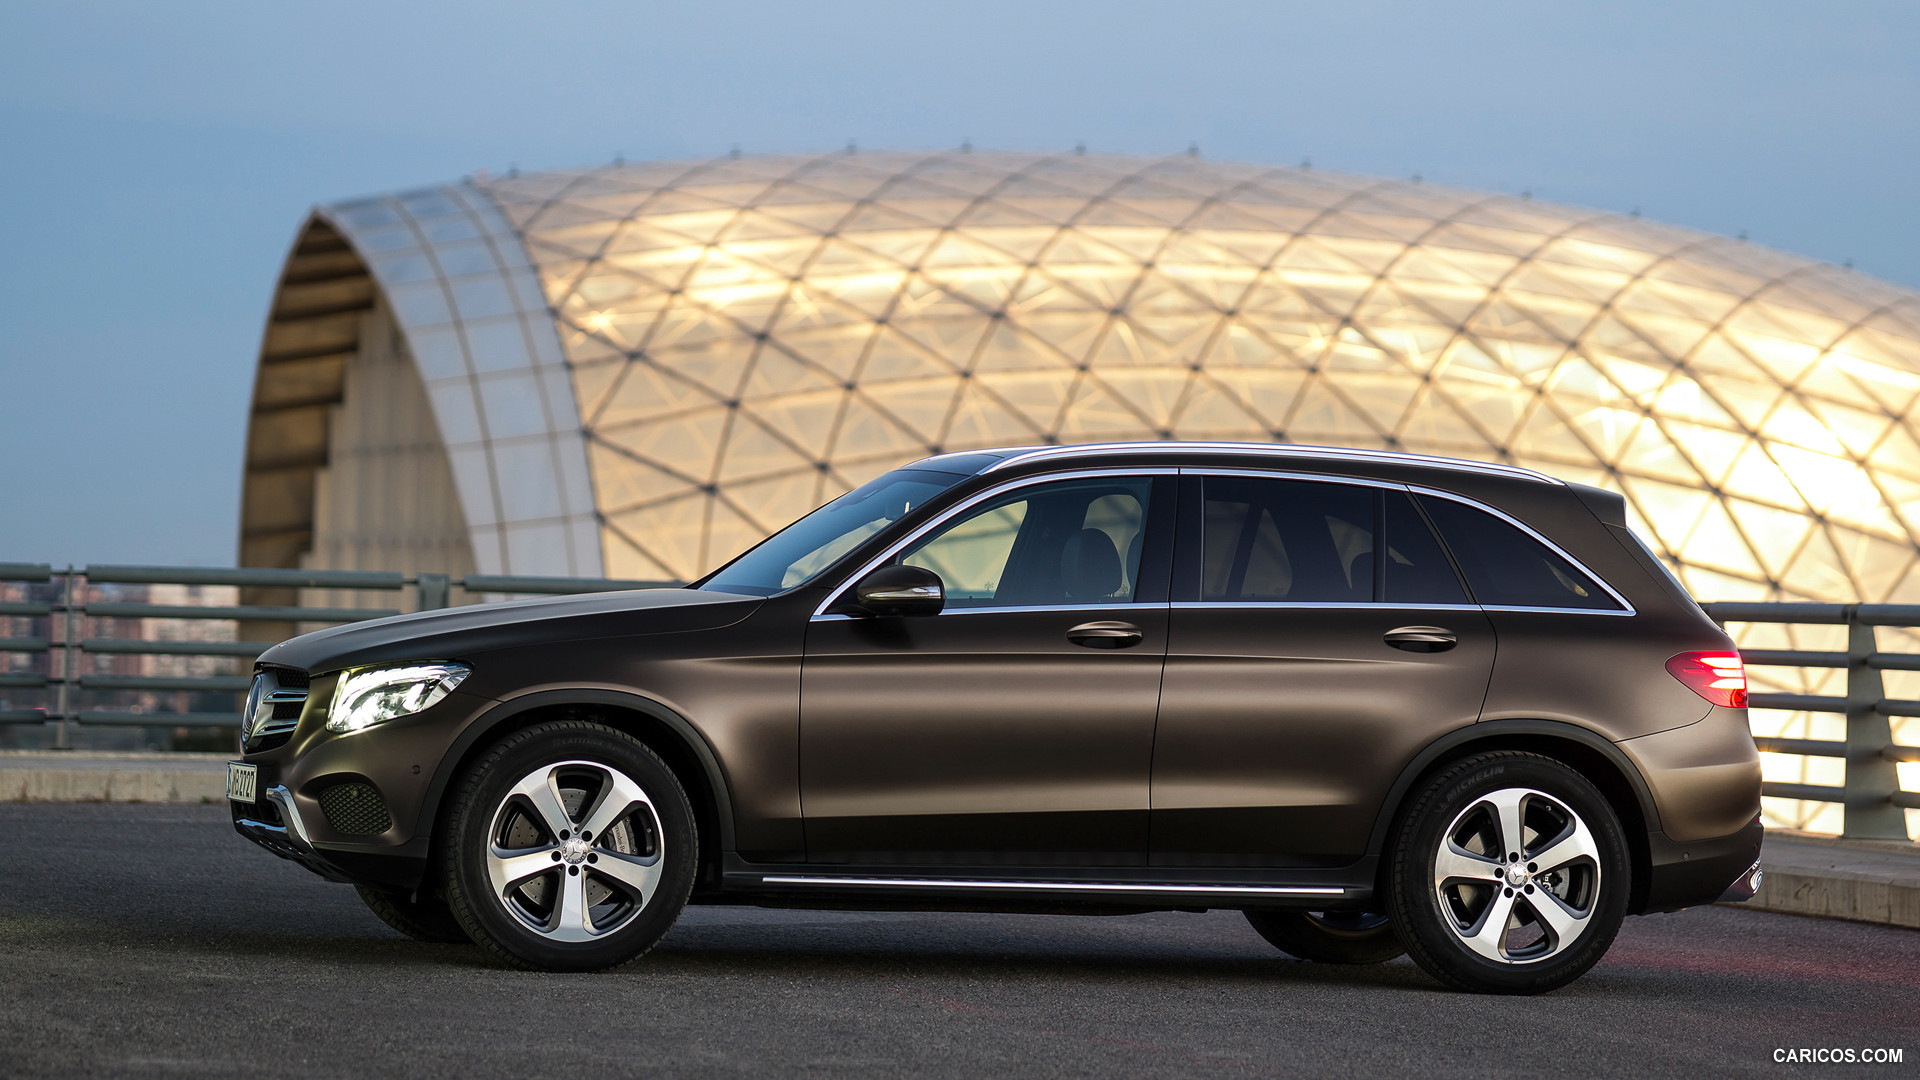 2016 Mercedes-Benz GLC-Class GLC 250d 4MATIC (Citrine Brown Magno, Offroad Line) - Side, #19 of 254